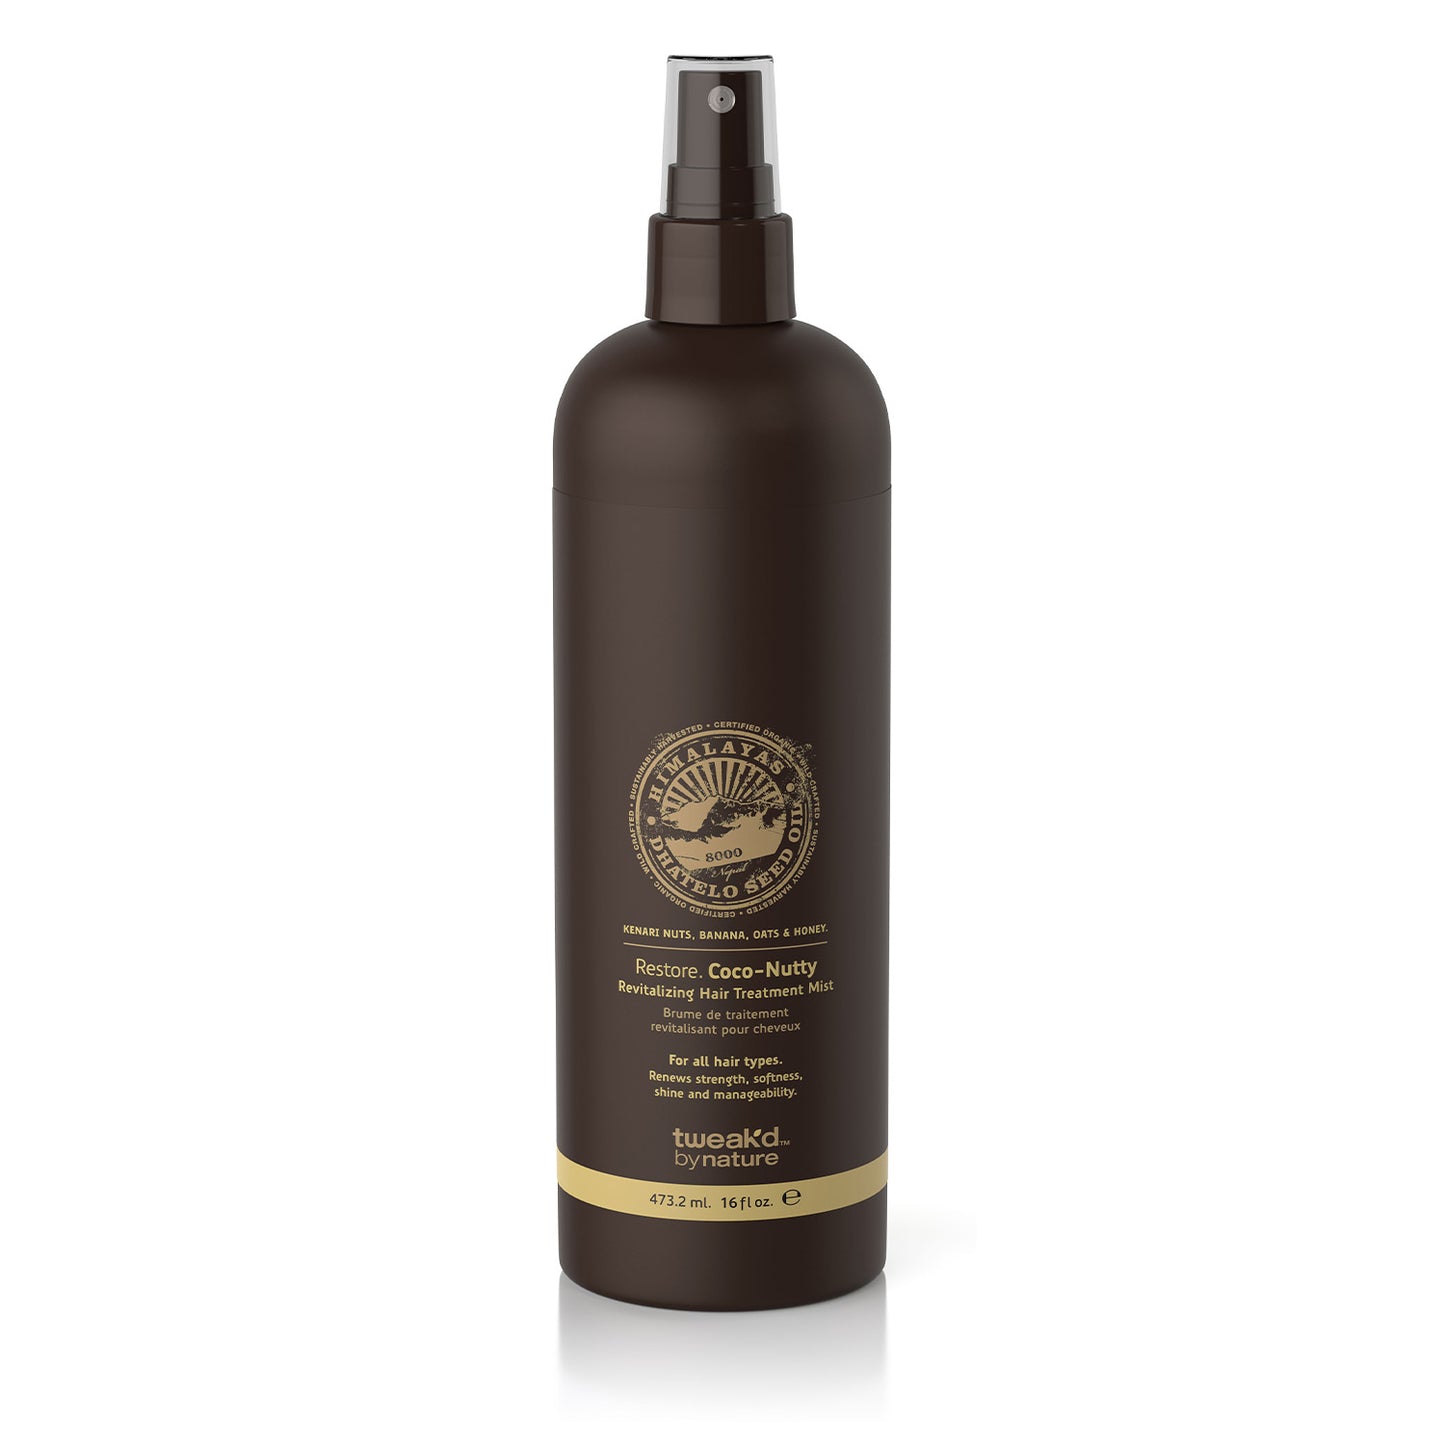 Tweak'd by Nature Coco-Nutty Hair Revitalizing Treatment Mist